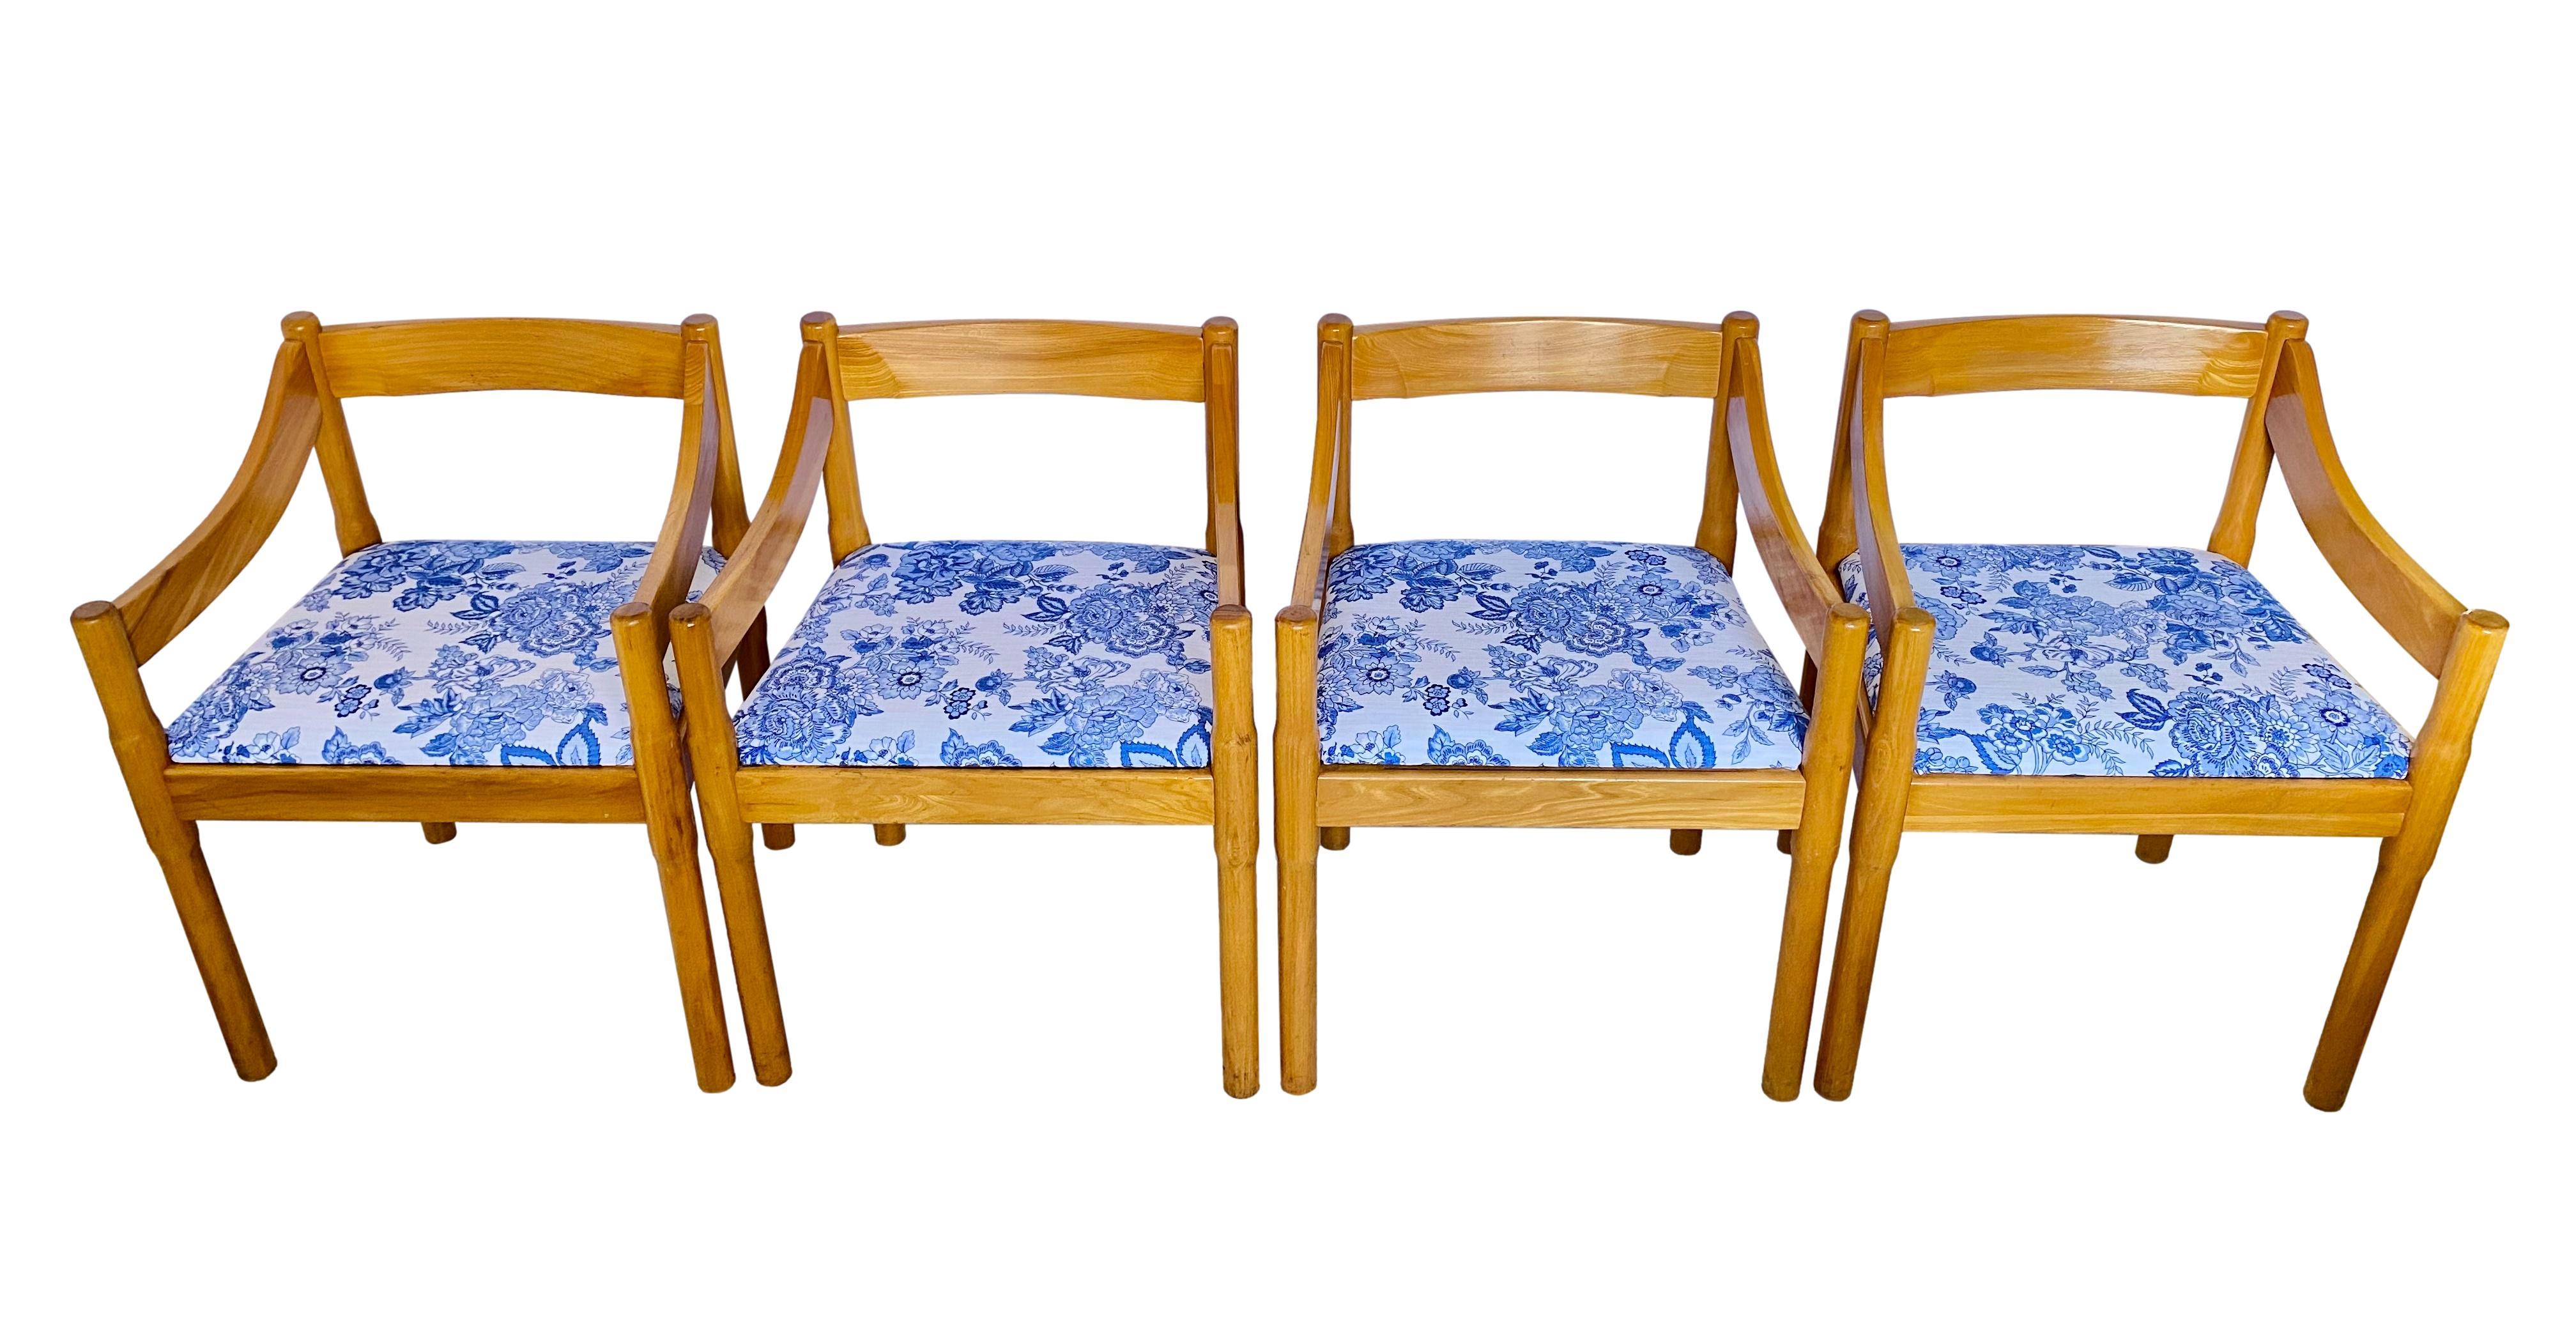 A vintage mid-century modern set of four Vico Magistretti Carimate beechwood armchairs by Thonet. Seats recovered in blue and white Jacobean floral print cotton canvas.

Dimensions: 23